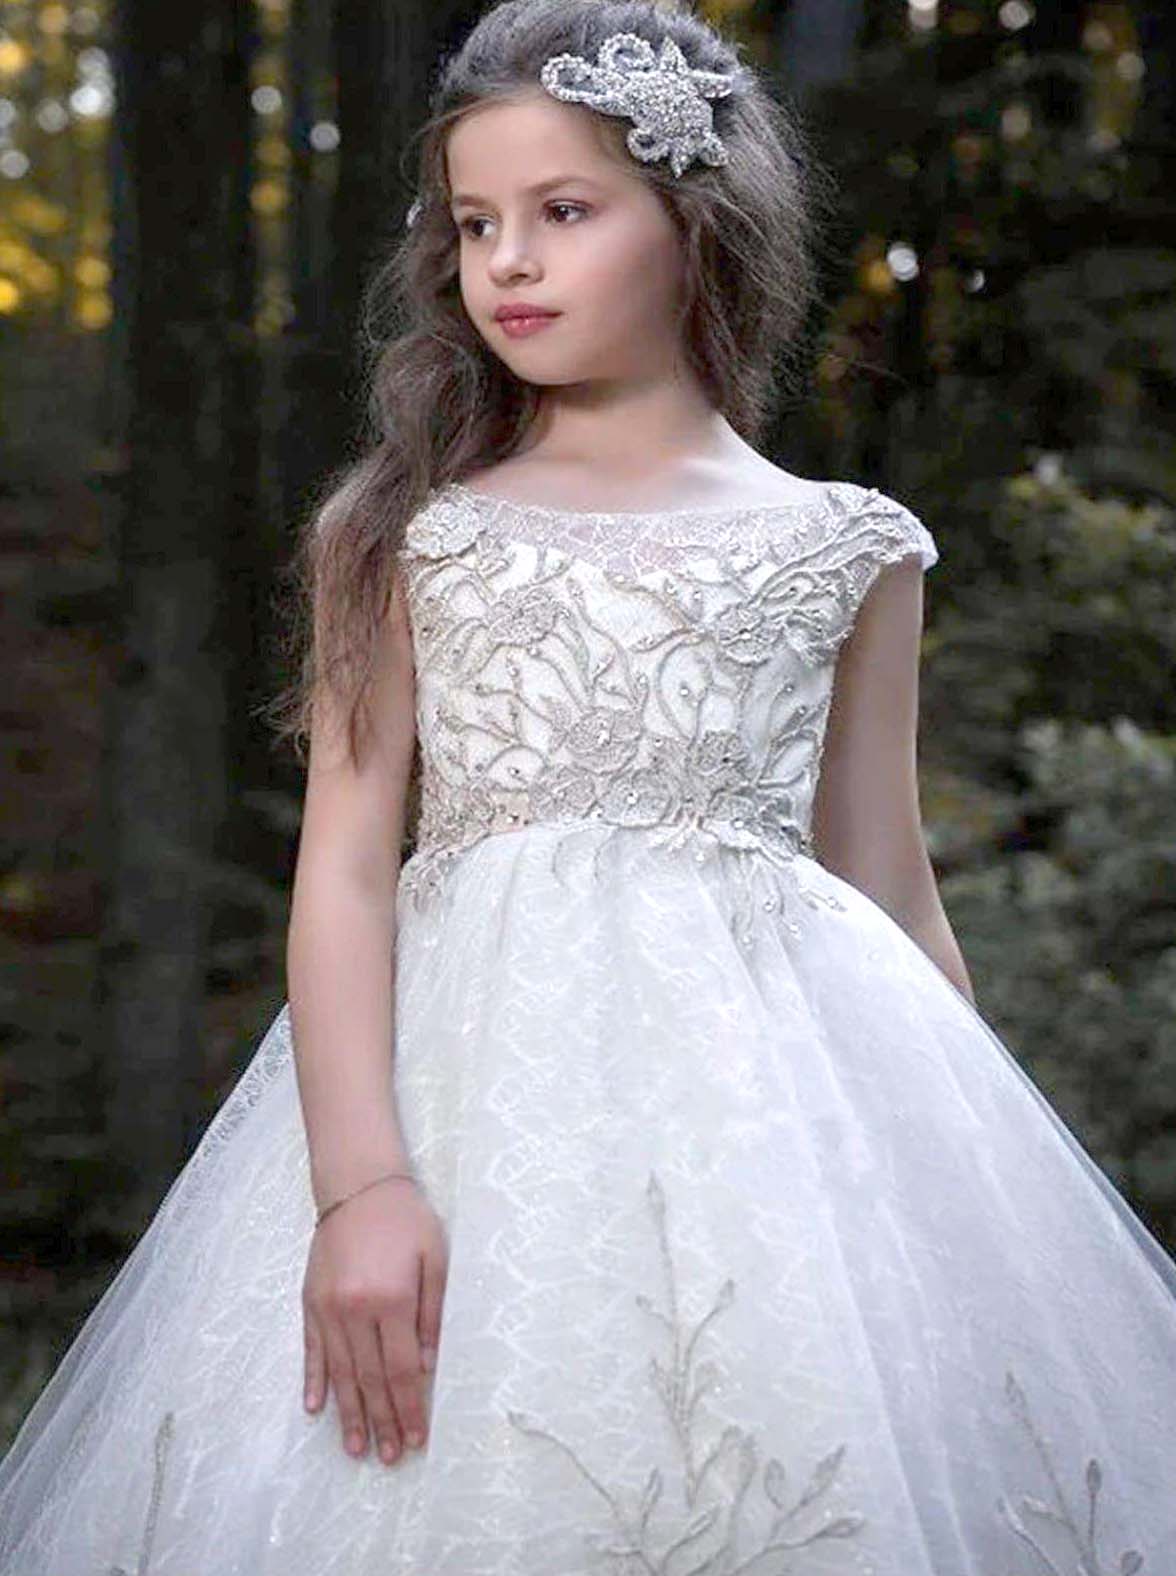 Mia Belle Girls Communion Dresses | White Pearl Embroidered Gown